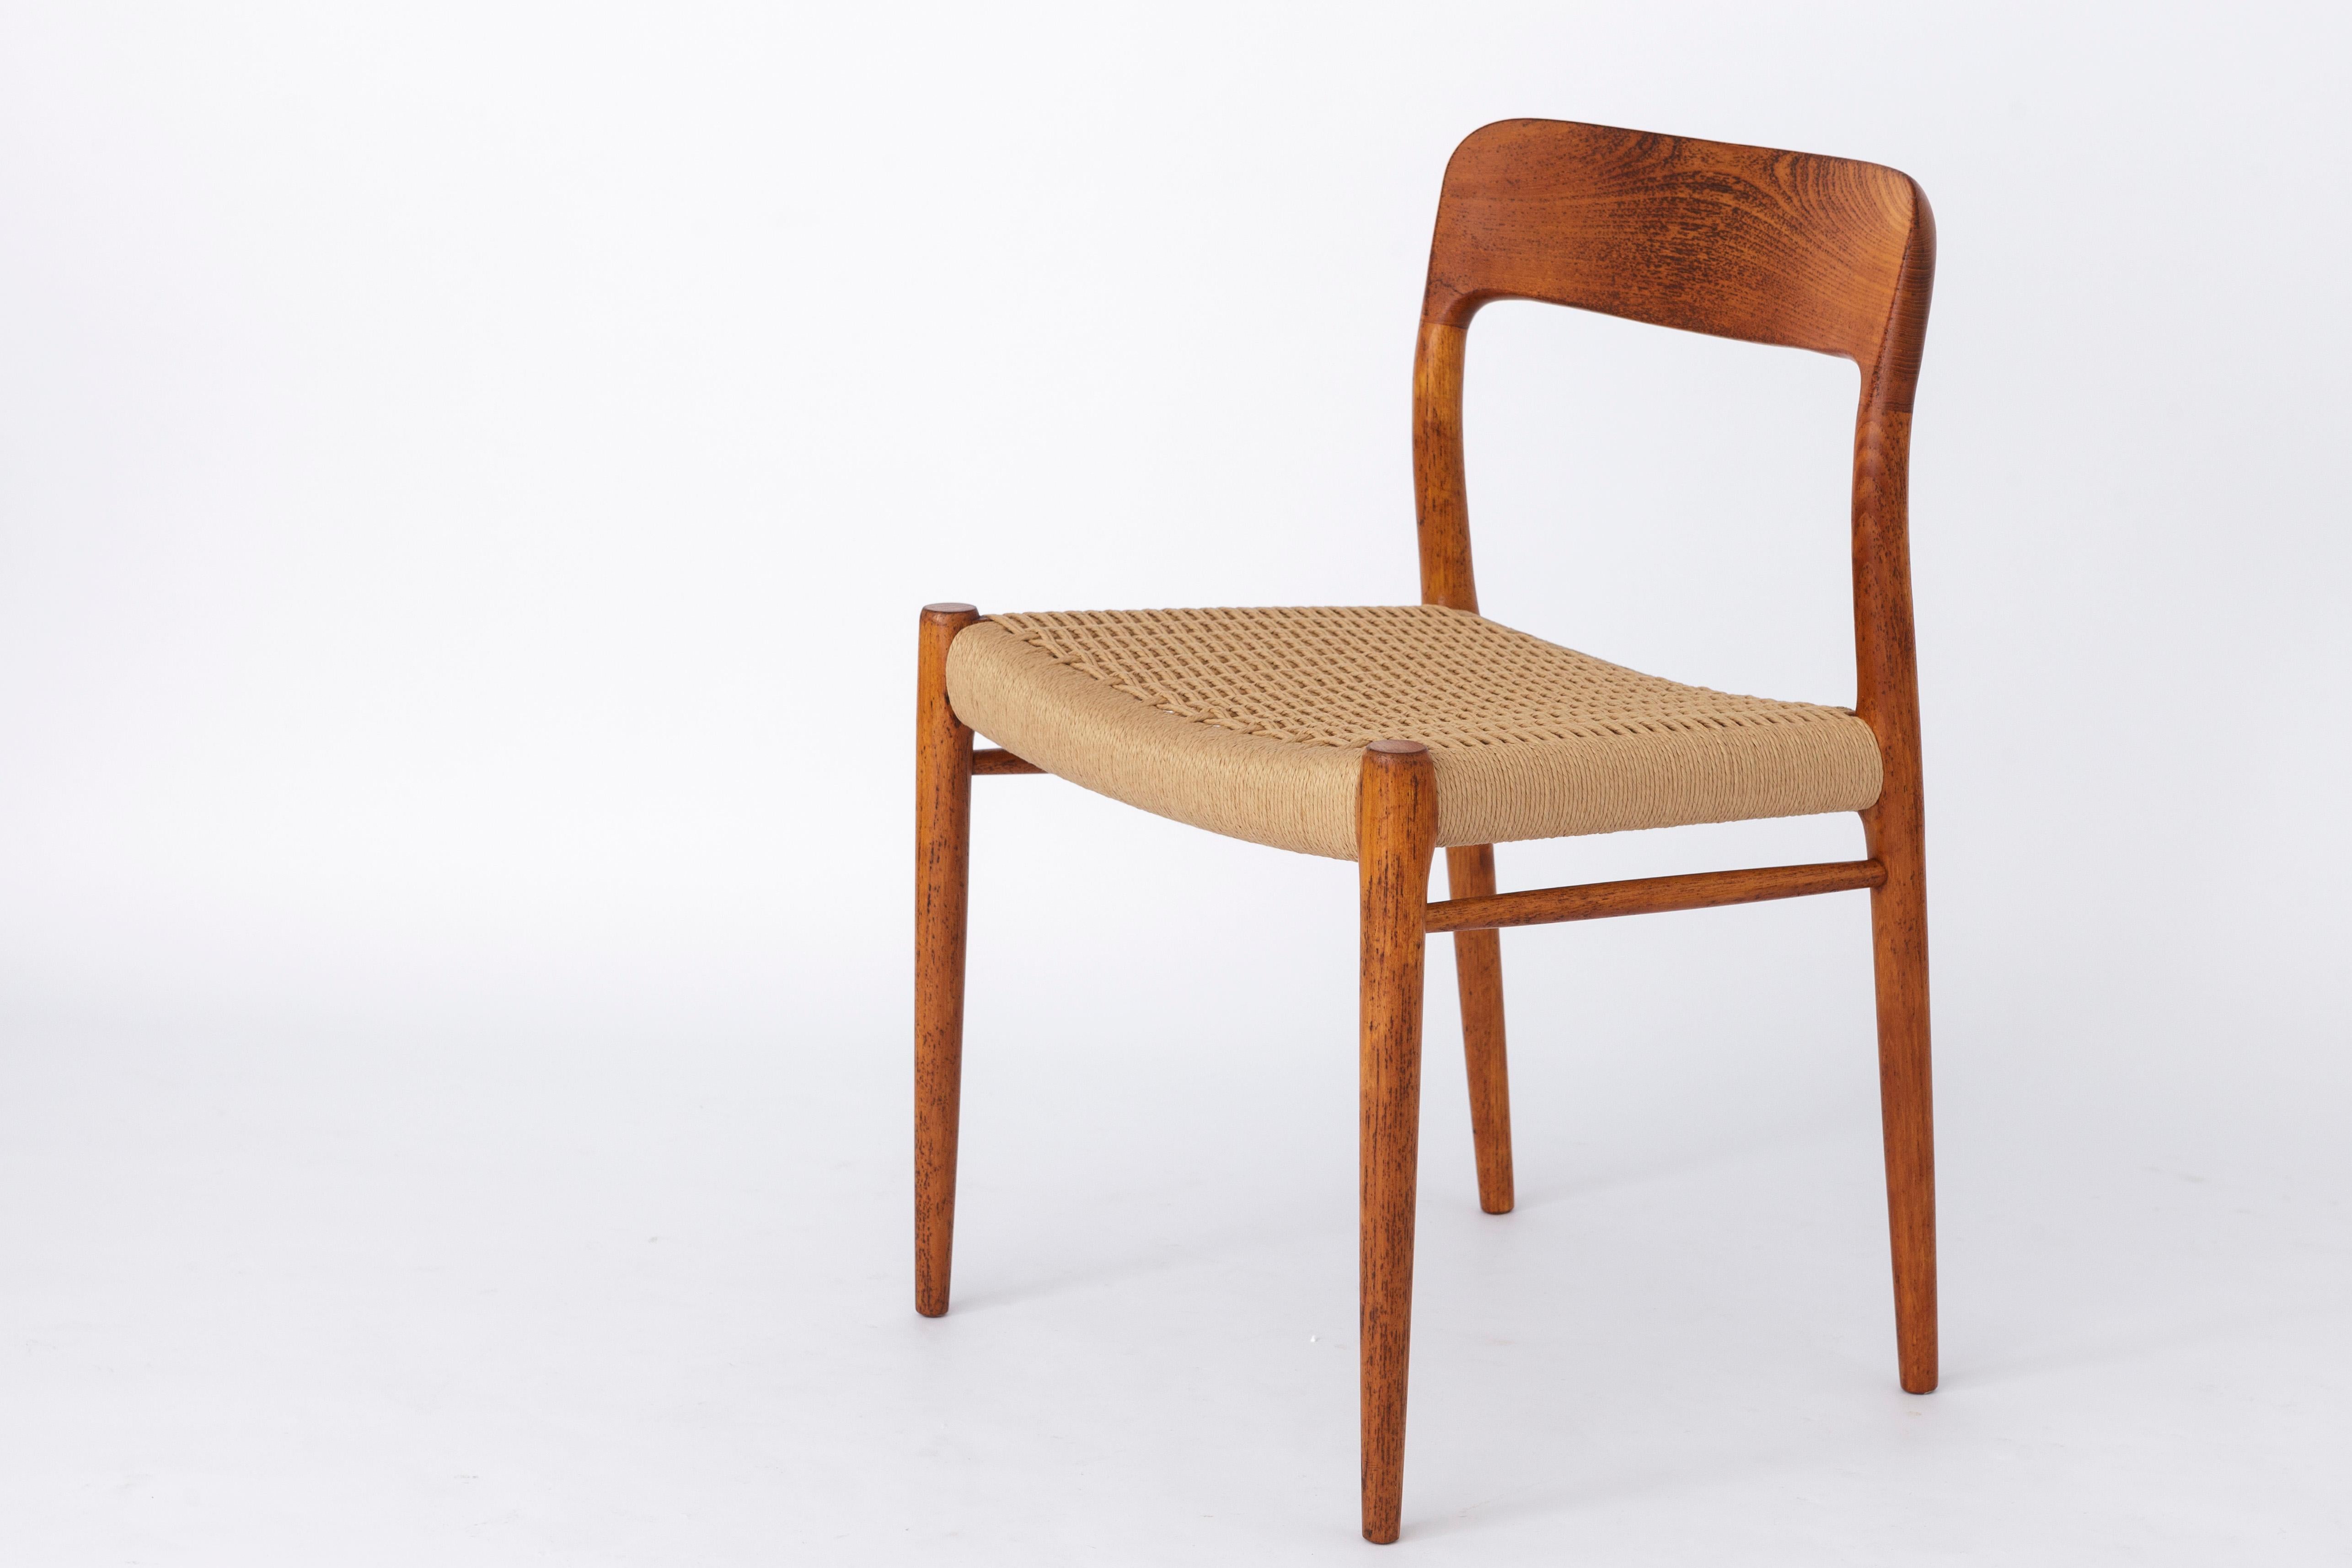 Polished Niels Moller Vintage Chair 1950s Danish Papercord For Sale